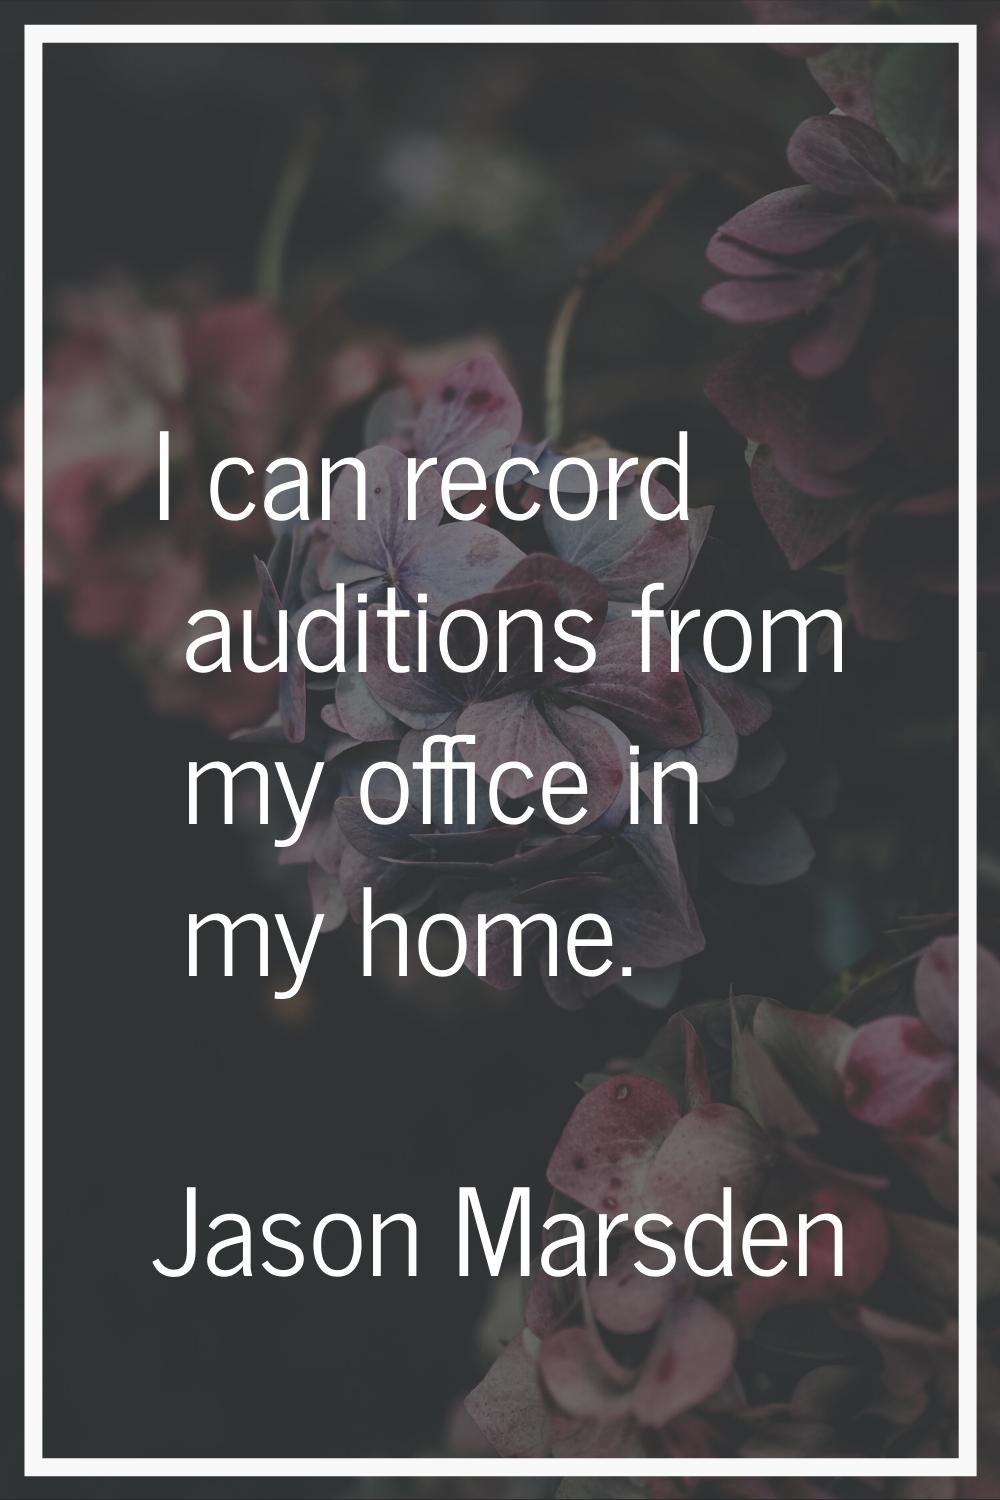 I can record auditions from my office in my home.